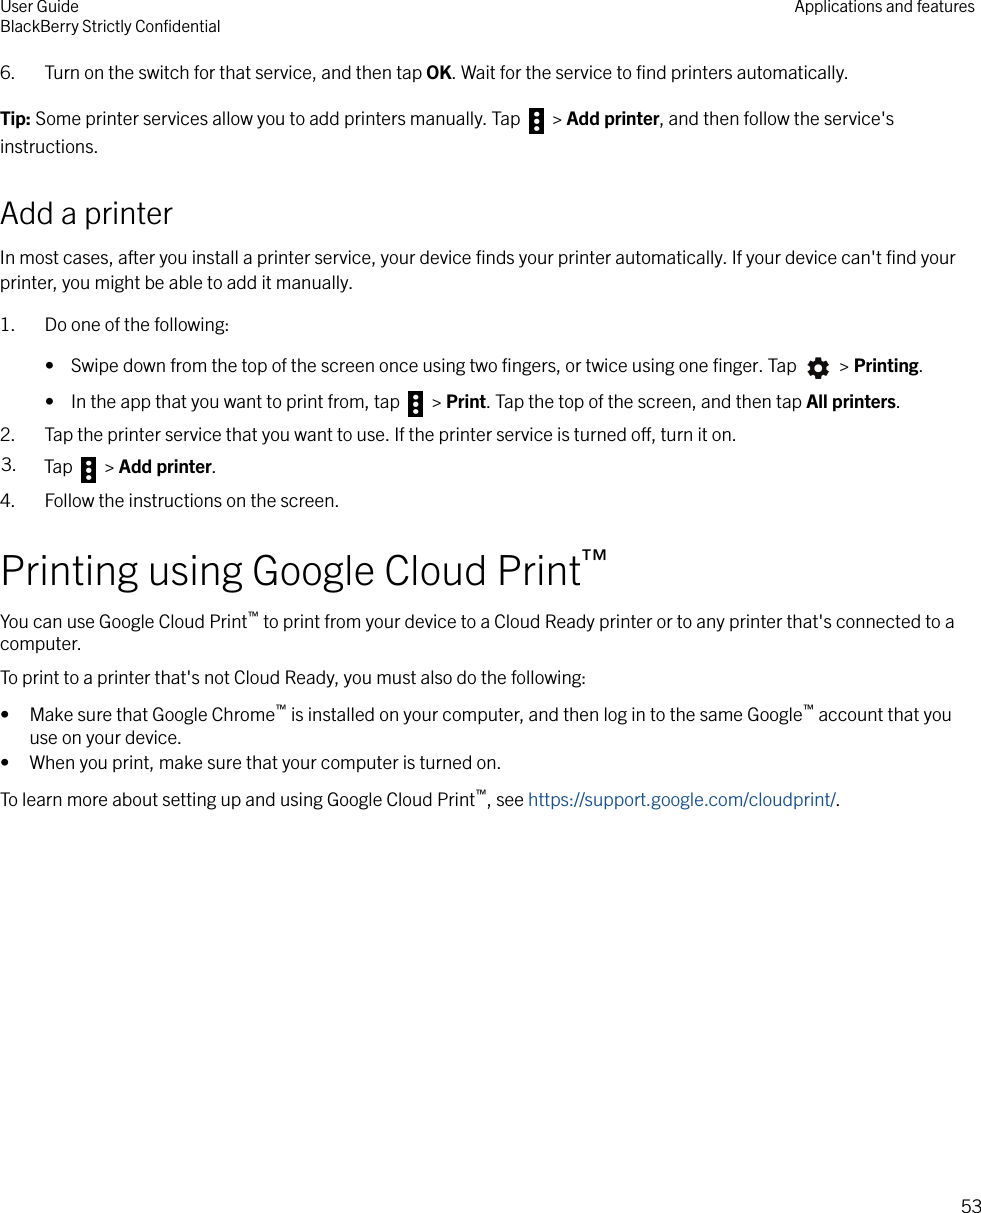 6. Turn on the switch for that service, and then tap OK. Wait for the service to ﬁnd printers automatically.Tip: Some printer services allow you to add printers manually. Tap   &gt; Add printer, and then follow the service&apos;sinstructions.Add a printerIn most cases, after you install a printer service, your device ﬁnds your printer automatically. If your device can&apos;t ﬁnd yourprinter, you might be able to add it manually.1. Do one of the following:•  Swipe down from the top of the screen once using two ﬁngers, or twice using one ﬁnger. Tap   &gt; Printing.•  In the app that you want to print from, tap   &gt; Print. Tap the top of the screen, and then tap All printers.2. Tap the printer service that you want to use. If the printer service is turned o, turn it on.3. Tap   &gt; Add printer.4. Follow the instructions on the screen.Printing using Google Cloud Print™You can use Google Cloud Print™ to print from your device to a Cloud Ready printer or to any printer that&apos;s connected to acomputer.To print to a printer that&apos;s not Cloud Ready, you must also do the following:• Make sure that Google Chrome™ is installed on your computer, and then log in to the same Google™ account that youuse on your device.• When you print, make sure that your computer is turned on.To learn more about setting up and using Google Cloud Print™, see https://support.google.com/cloudprint/.User GuideBlackBerry Strictly ConﬁdentialApplications and features53